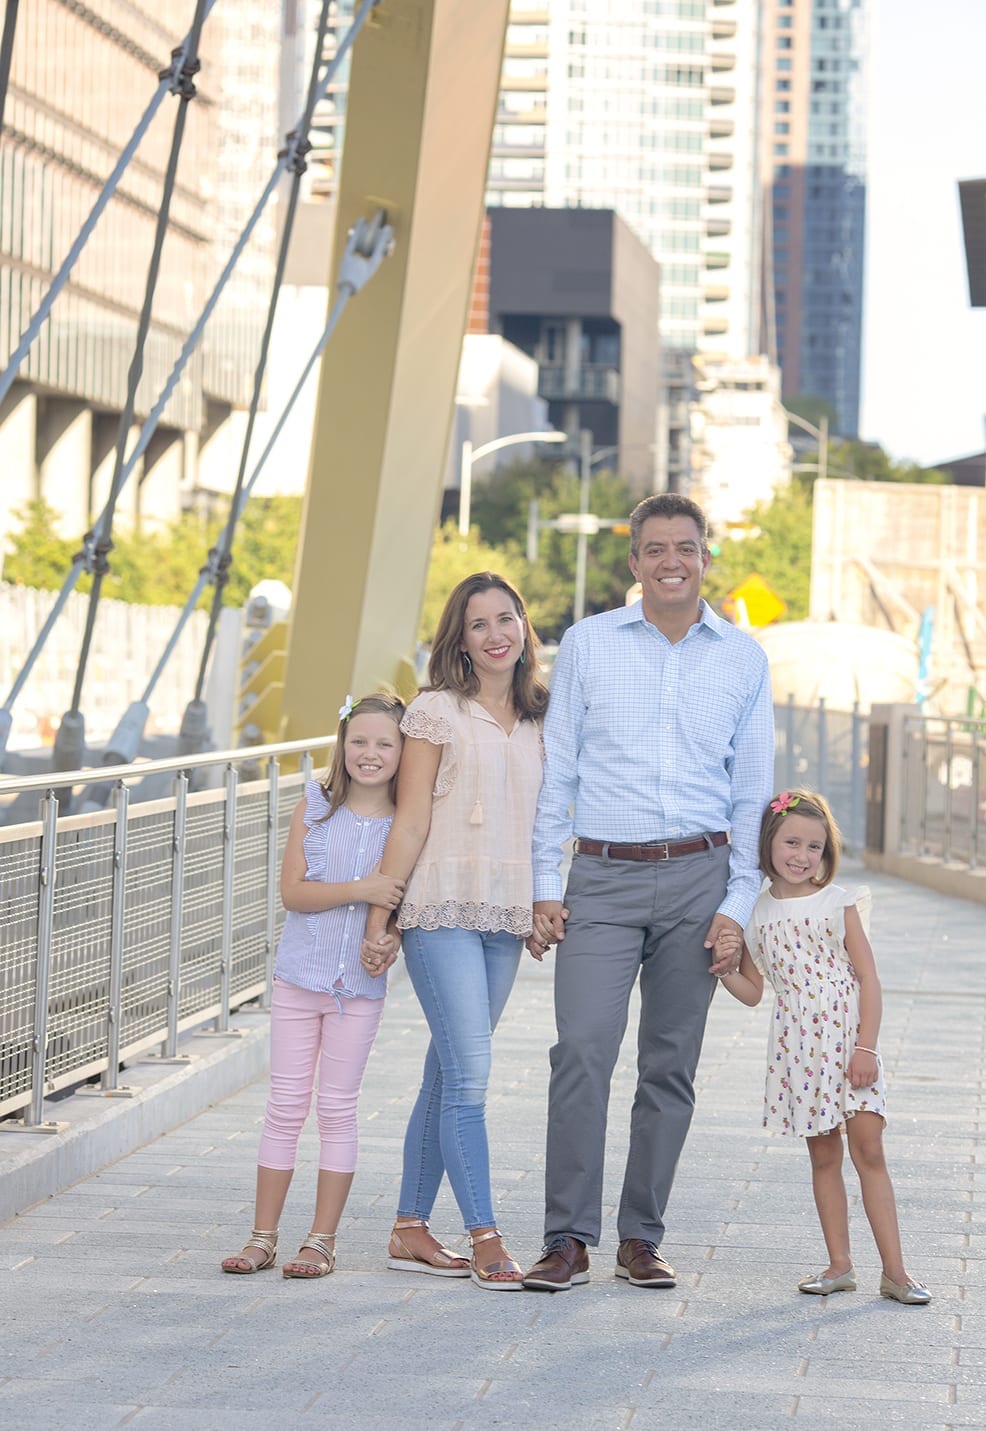 Summer in the City – Downtown Family Session